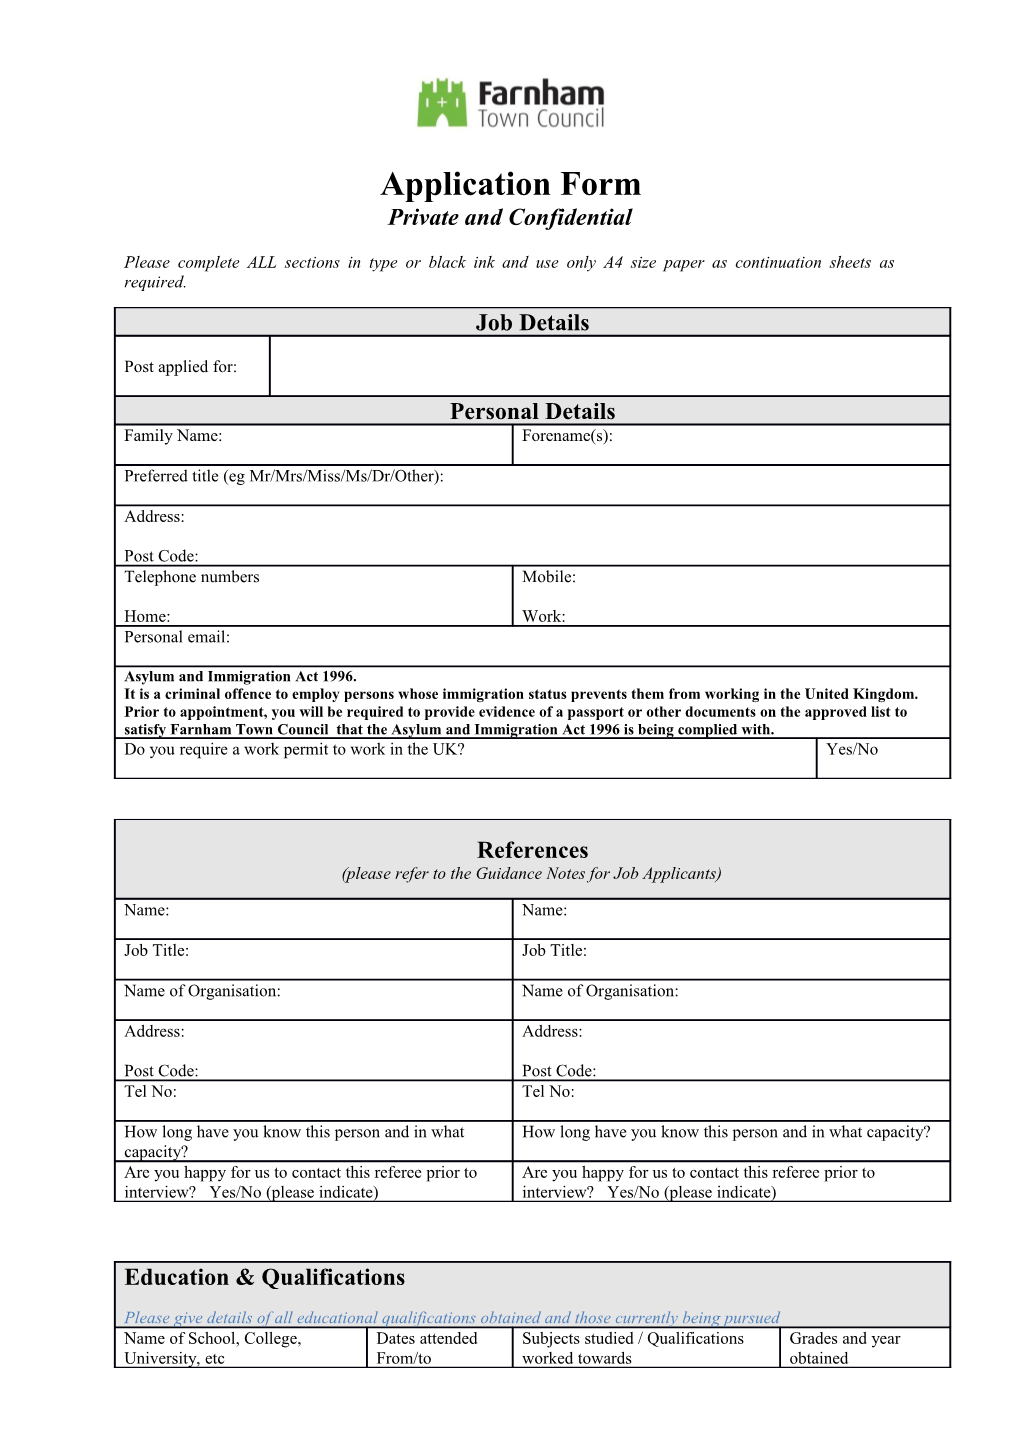 Application Form s93